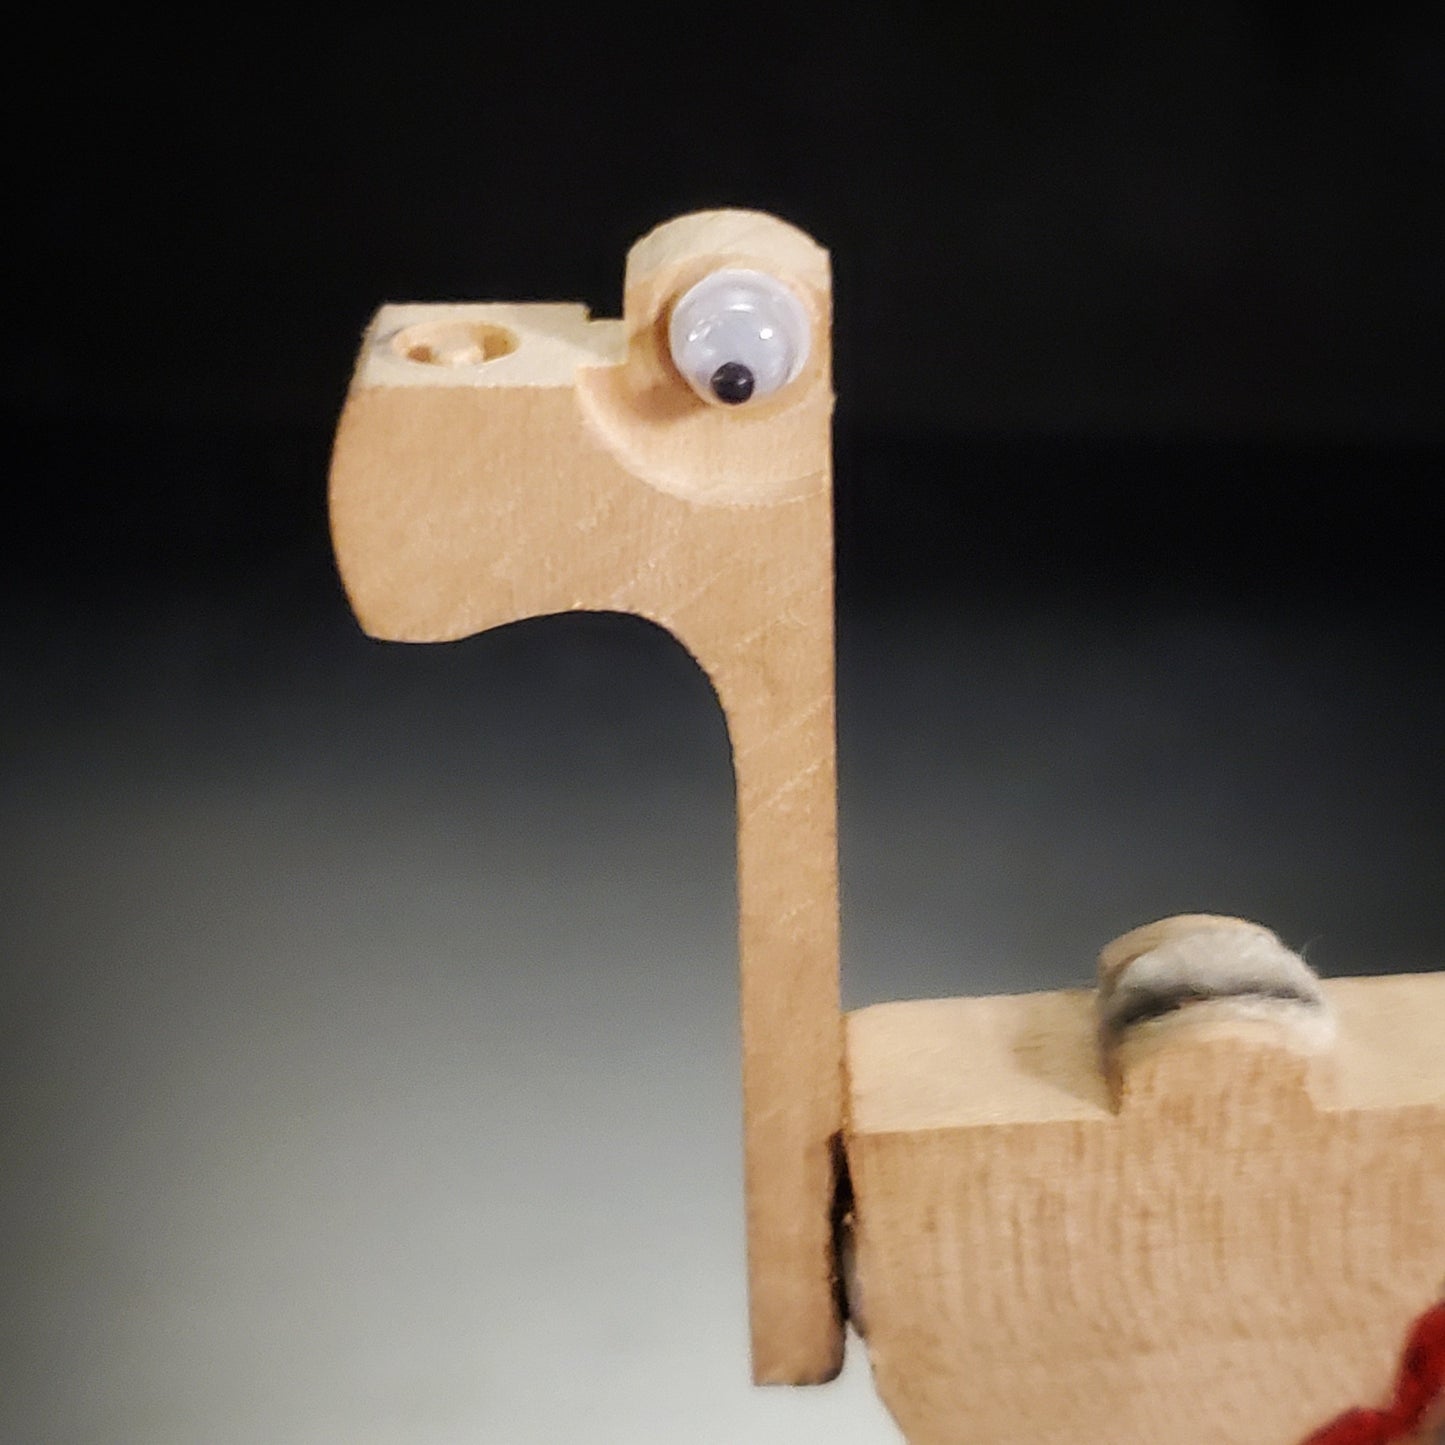 close-up of a a magnet in the shape of a dinosaur-like animal made from pieces of a piano mechanism